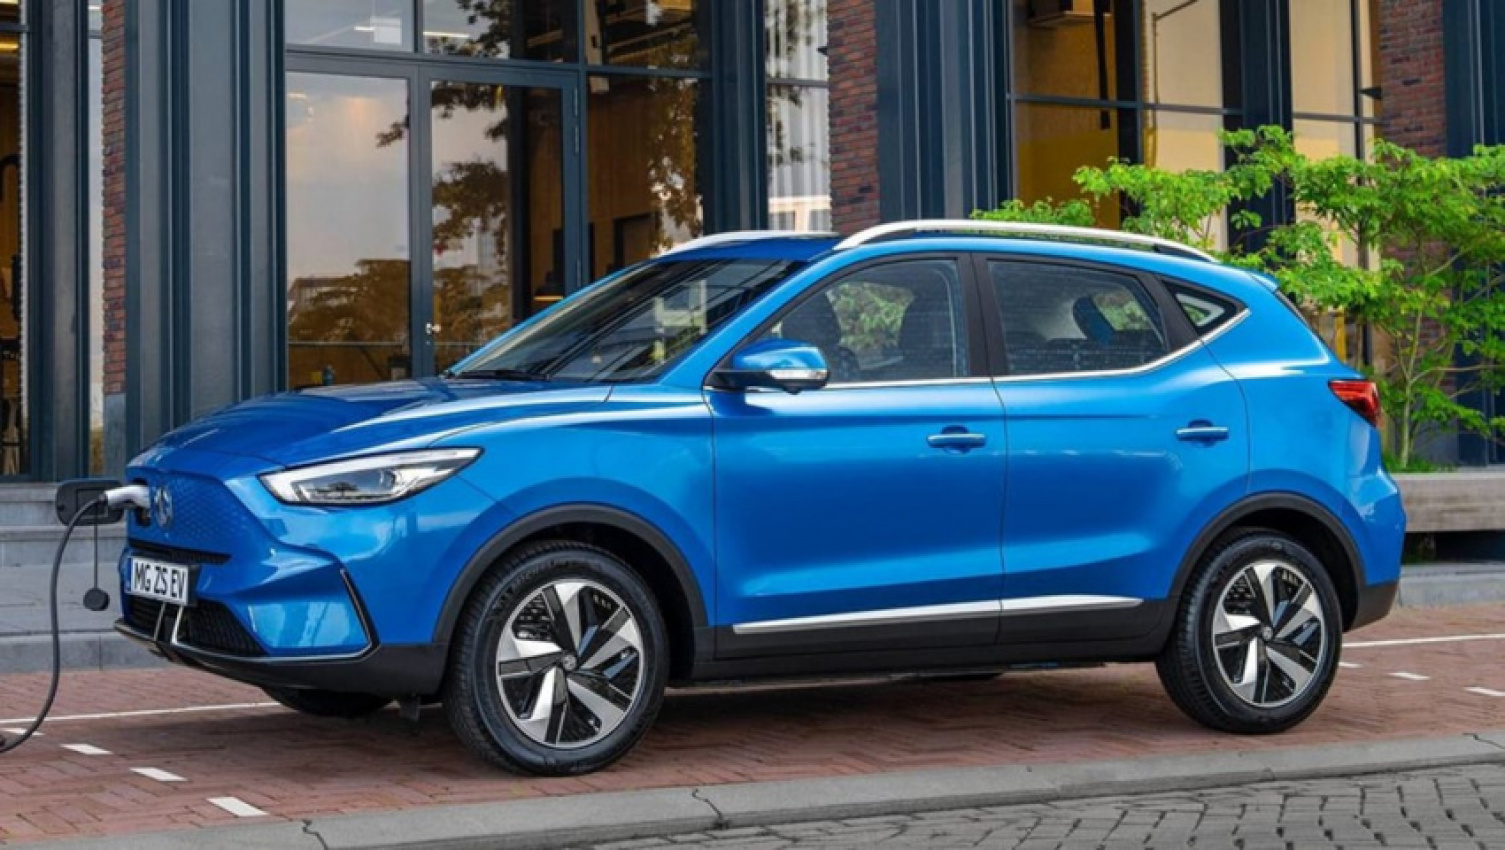 autos, cars, mg, electric, electric cars, family cars, green cars, industry news, mg suv range, mg zs, mg zs 2022, mg zs ev, showroom news, small cars, how long before an electric car starts paying off? 2022 mg zs ev vs zs petrol running costs compared